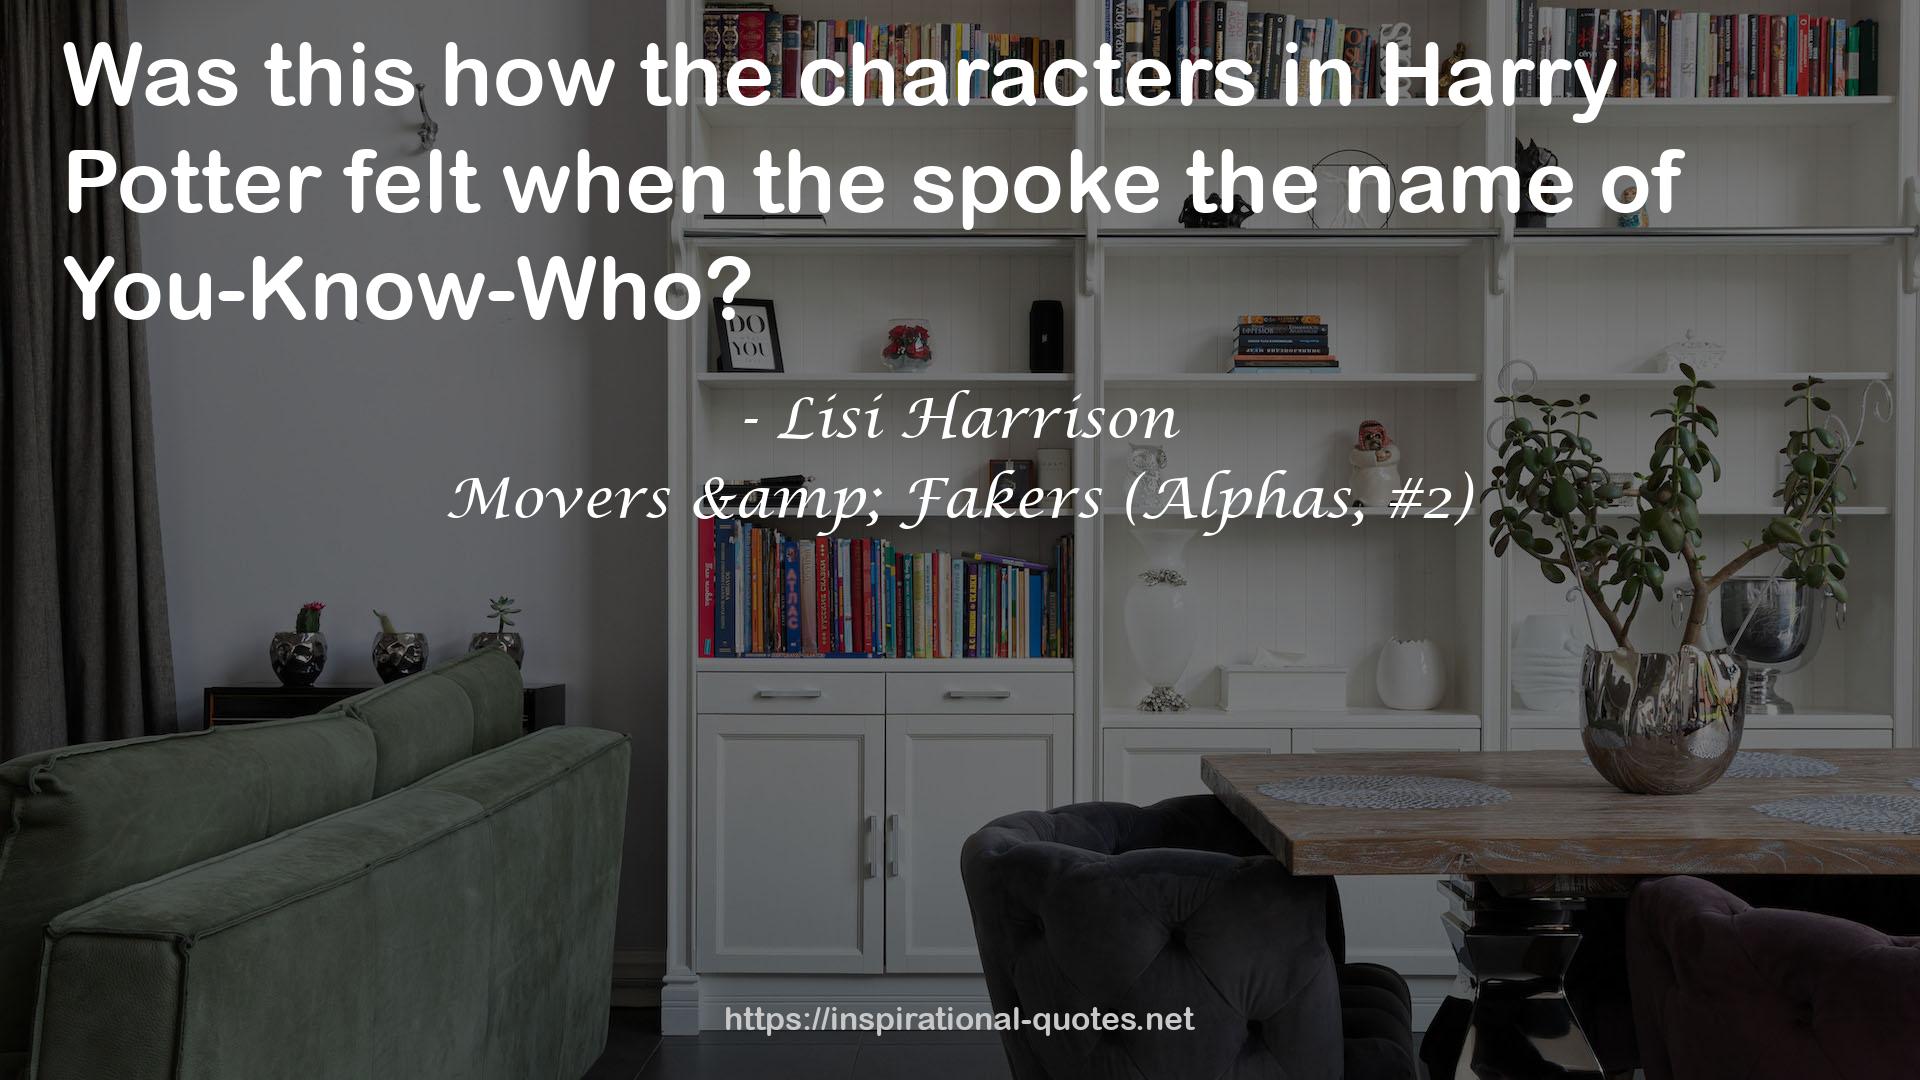 Movers & Fakers (Alphas, #2) QUOTES